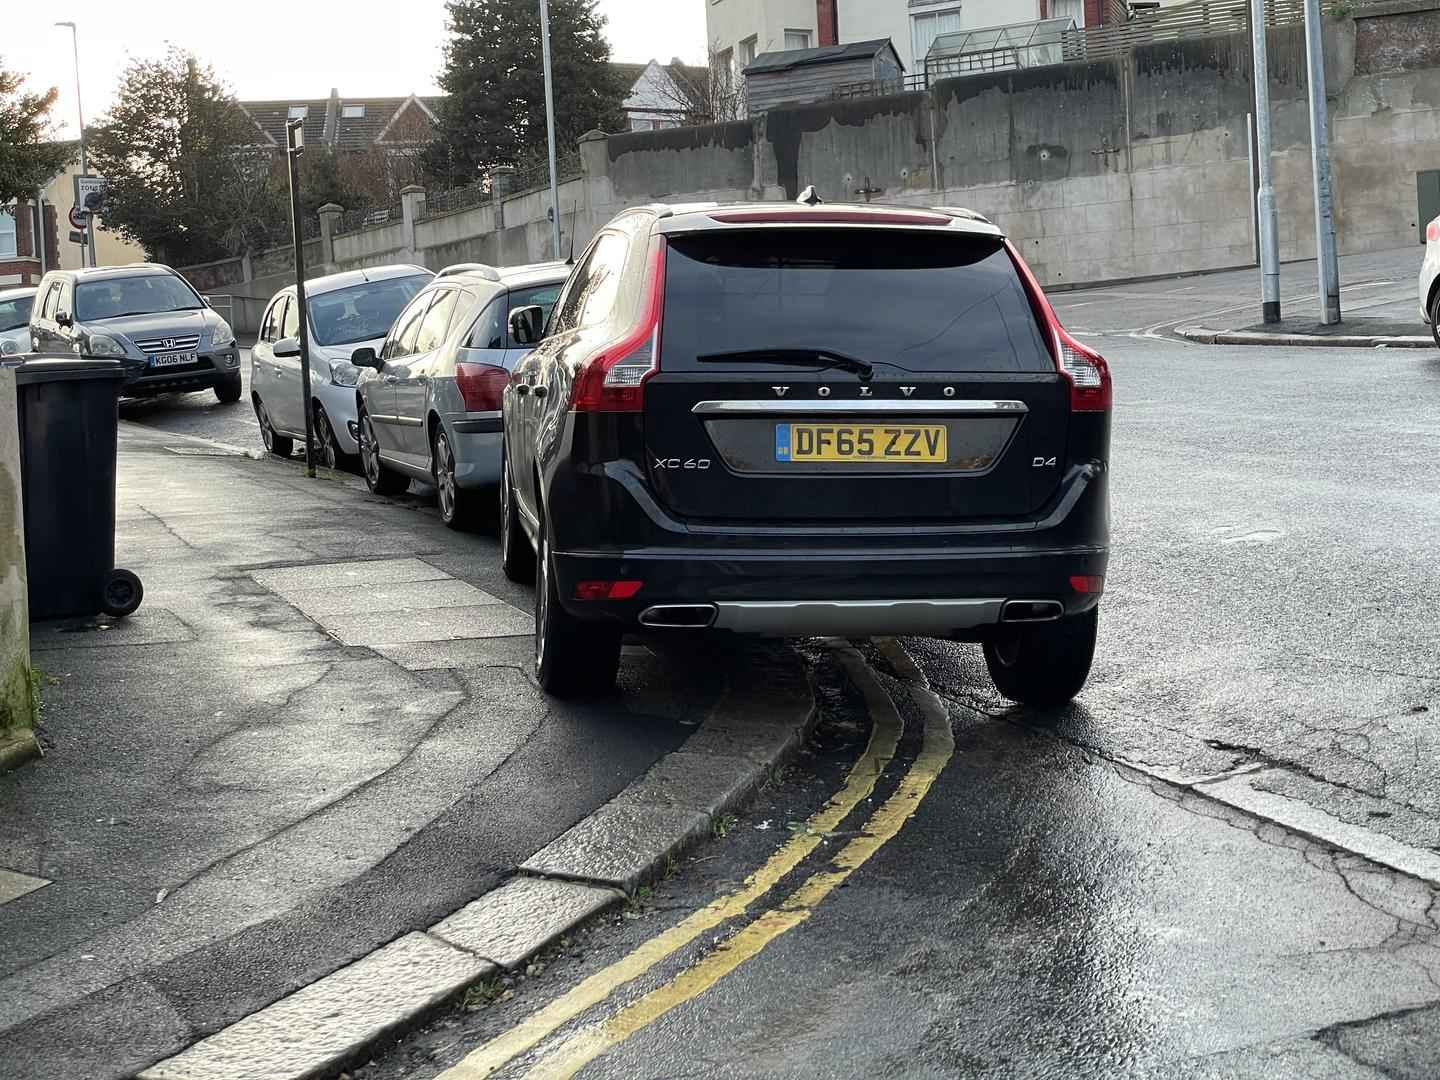 Photograph of DF65 ZZV - a Black Volvo XC60 parked in Hollingdean by a non-resident. The second of eight photographs supplied by the residents of Hollingdean.